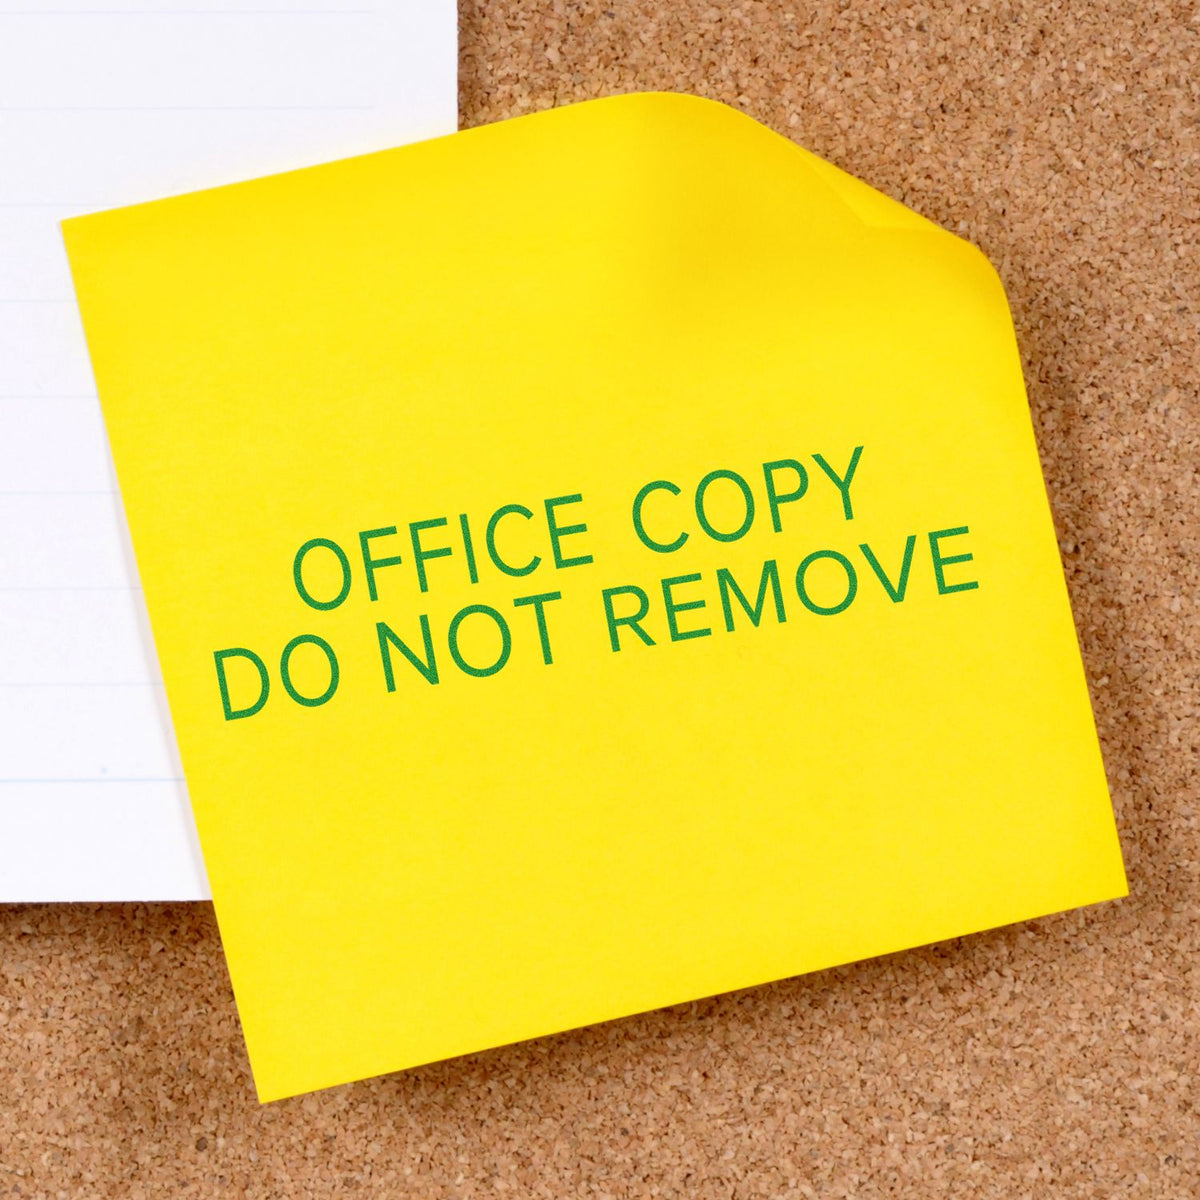 Narrow Font Office Copy Do Not Remove Rubber Stamp In Use